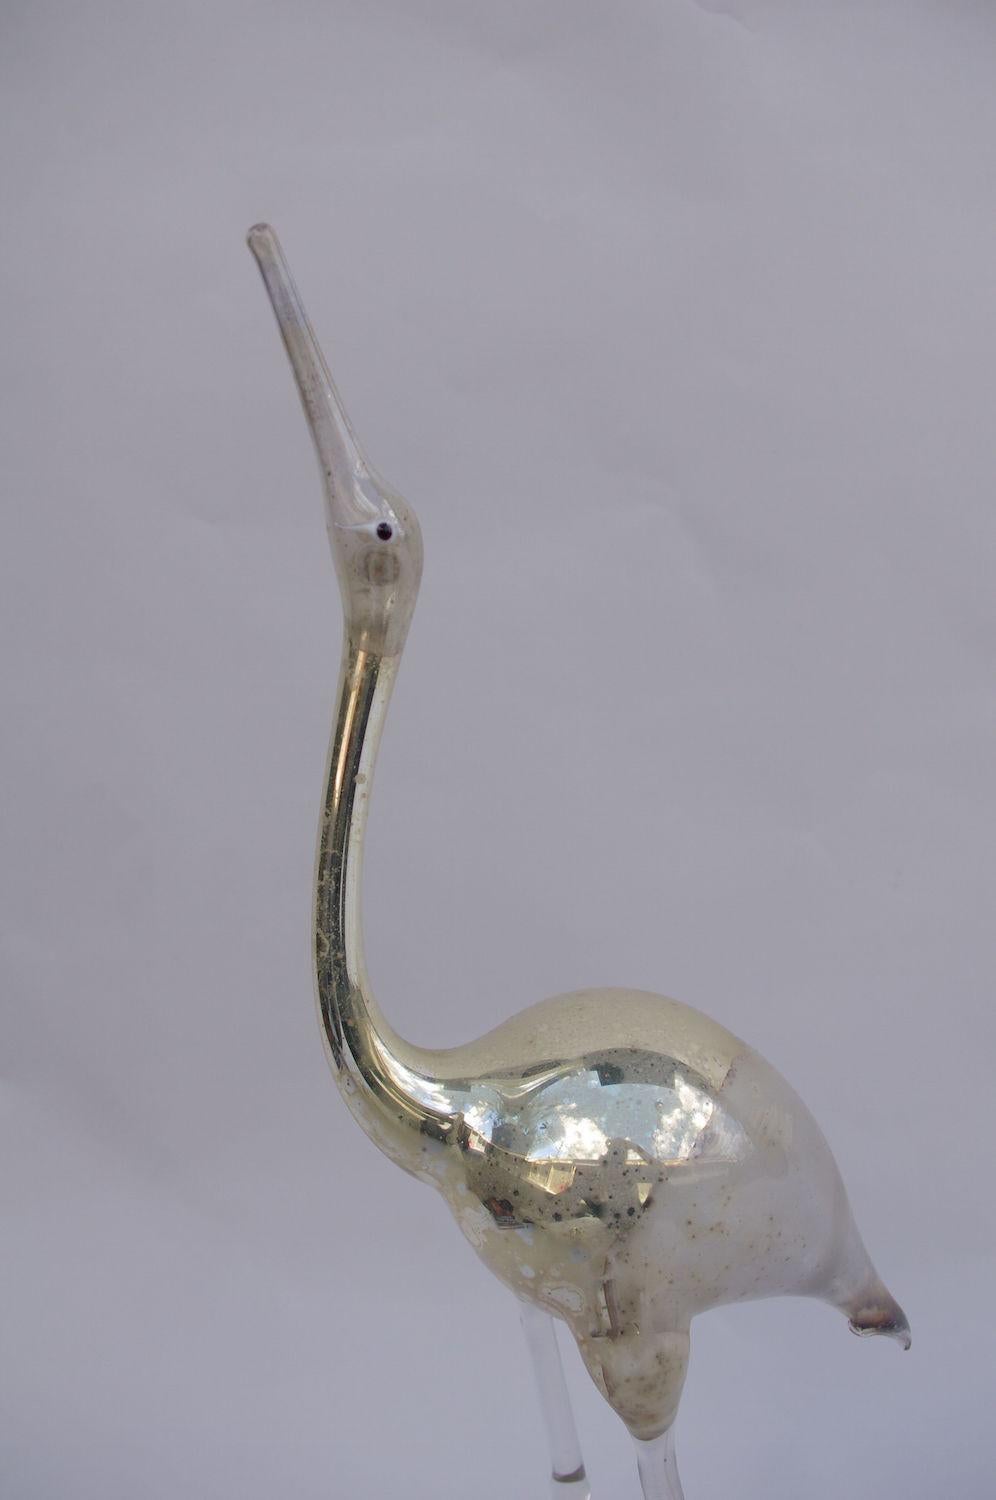 Pair of Murano mouth-blown glass cranes.
Italian work from 1970s.